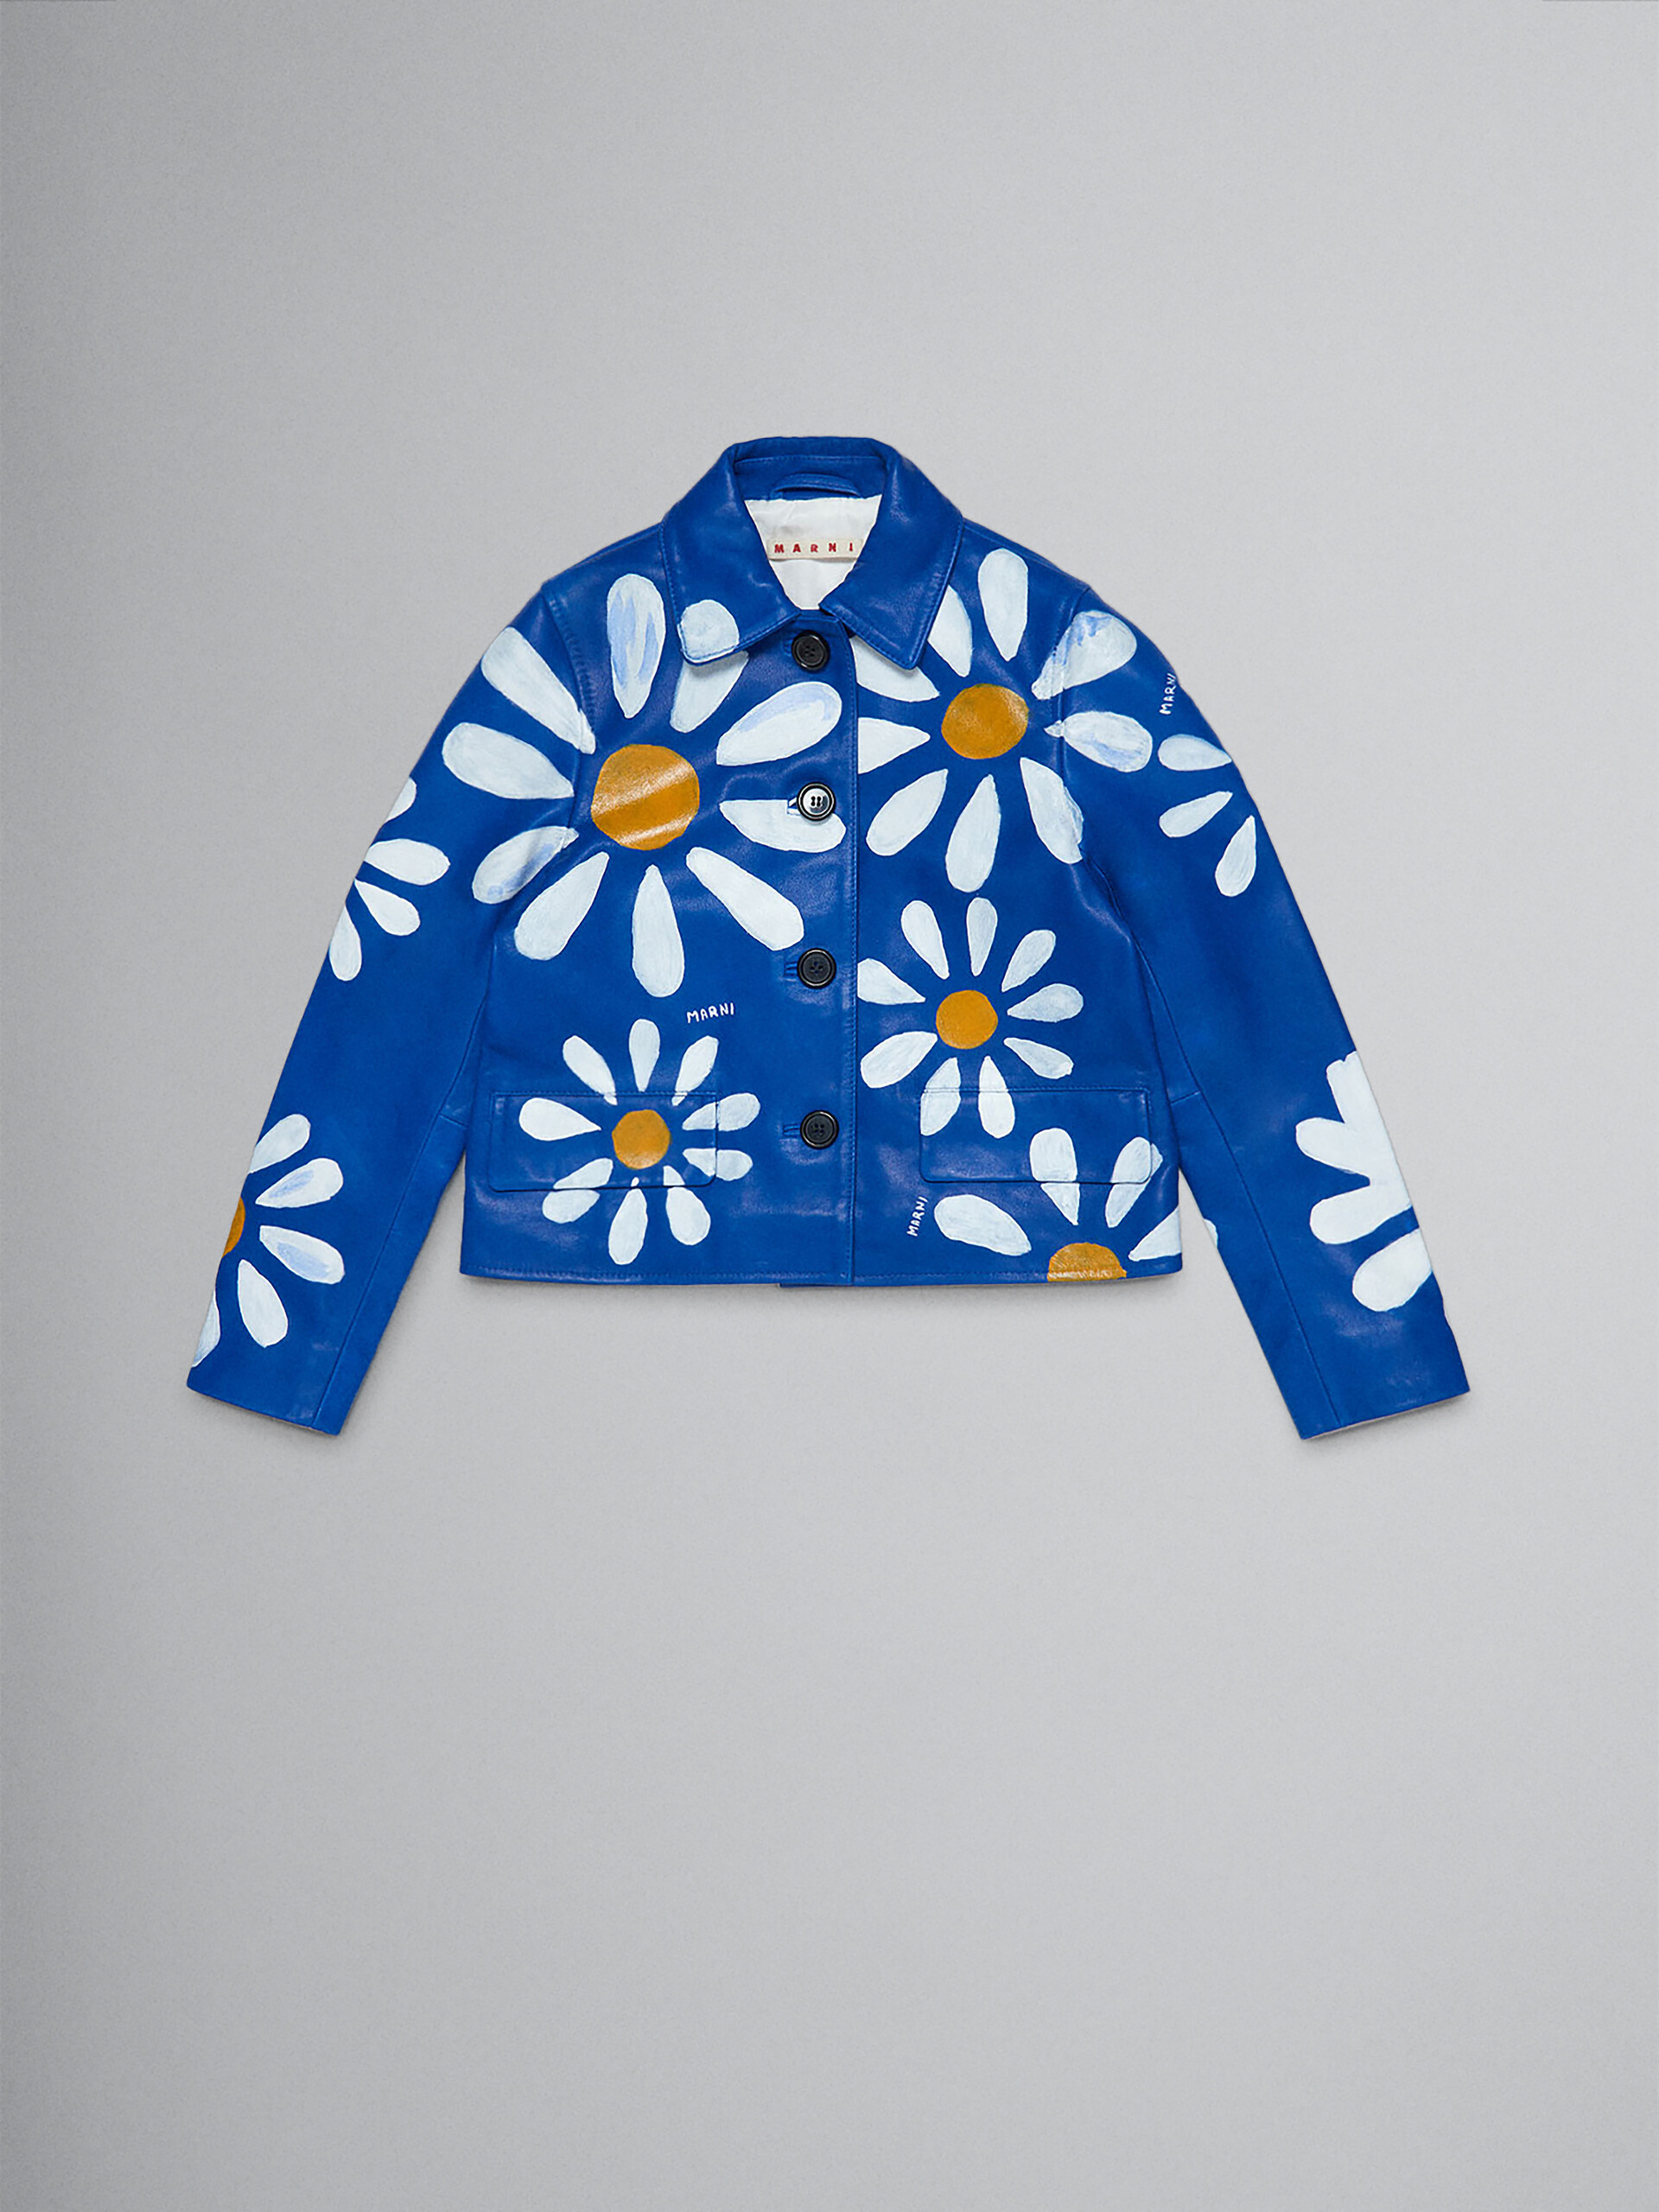 Blue genuine leather jacket with hand-painted Daisy pattern - Jackets - Image 1